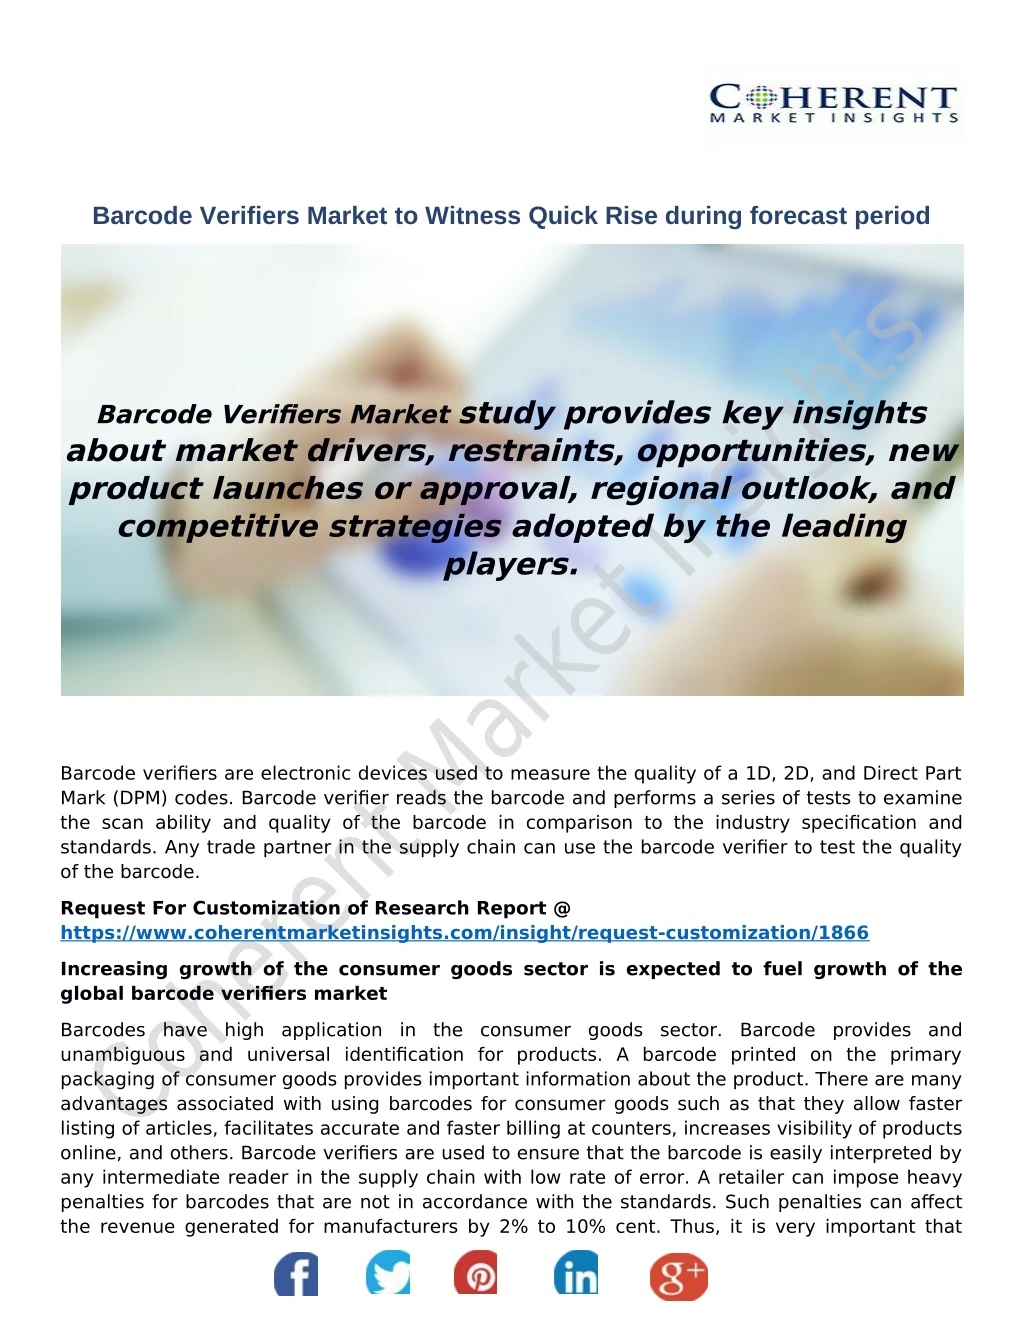 barcode verifiers market to witness quick rise